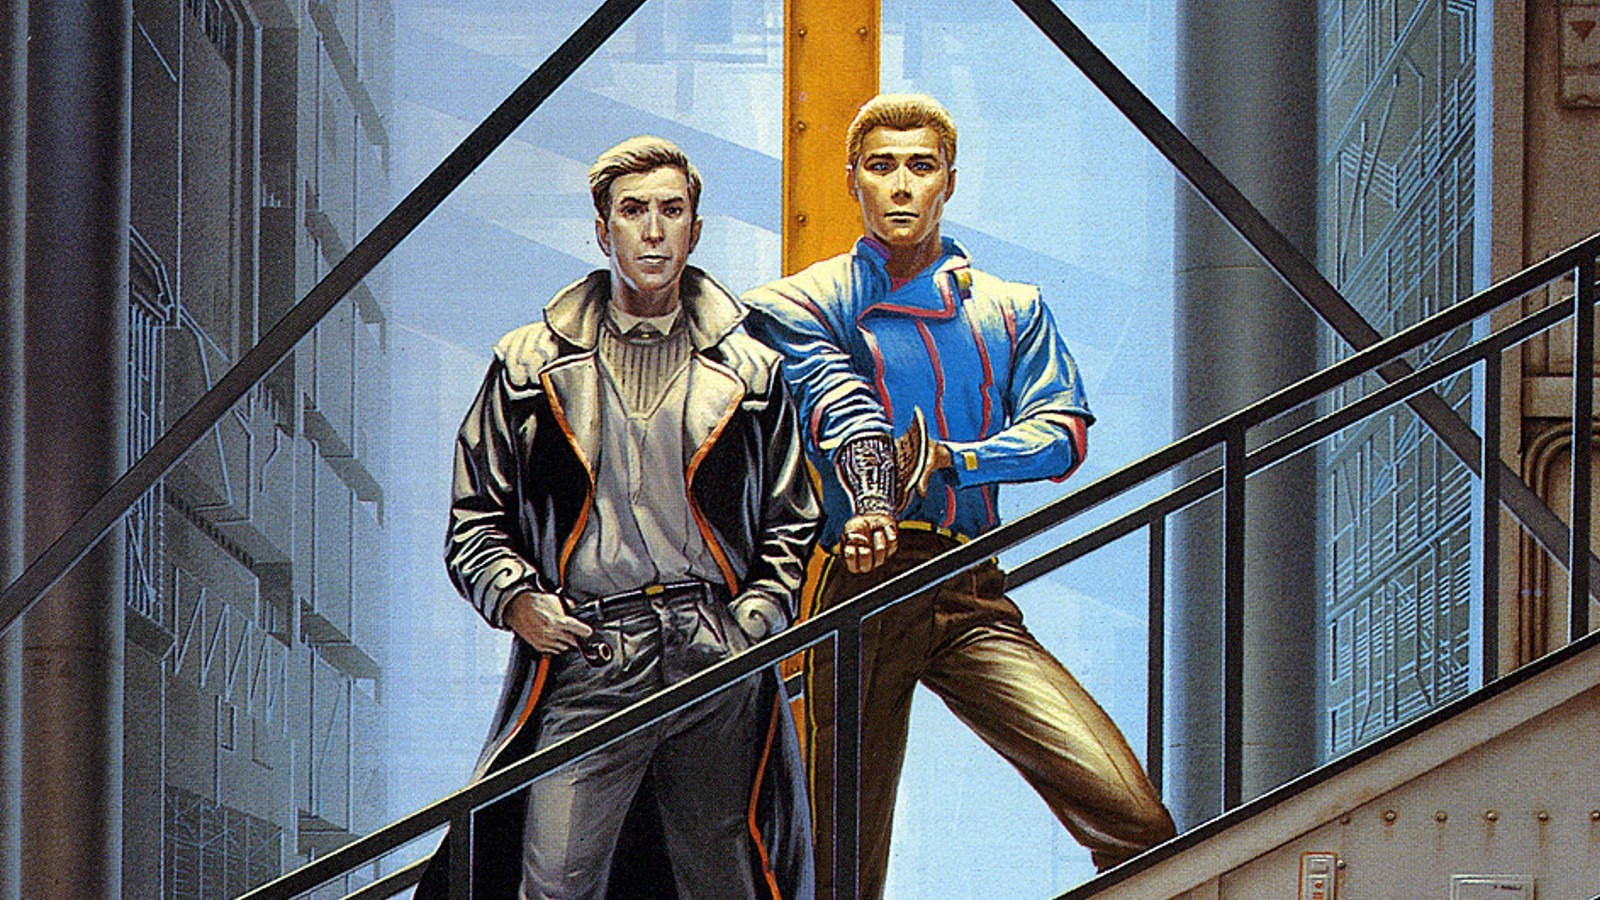 Isaac Asimov’s Caves Of Steel Is The Next Great Prestige Sci-Fi Series Waiting To Happen – Looper